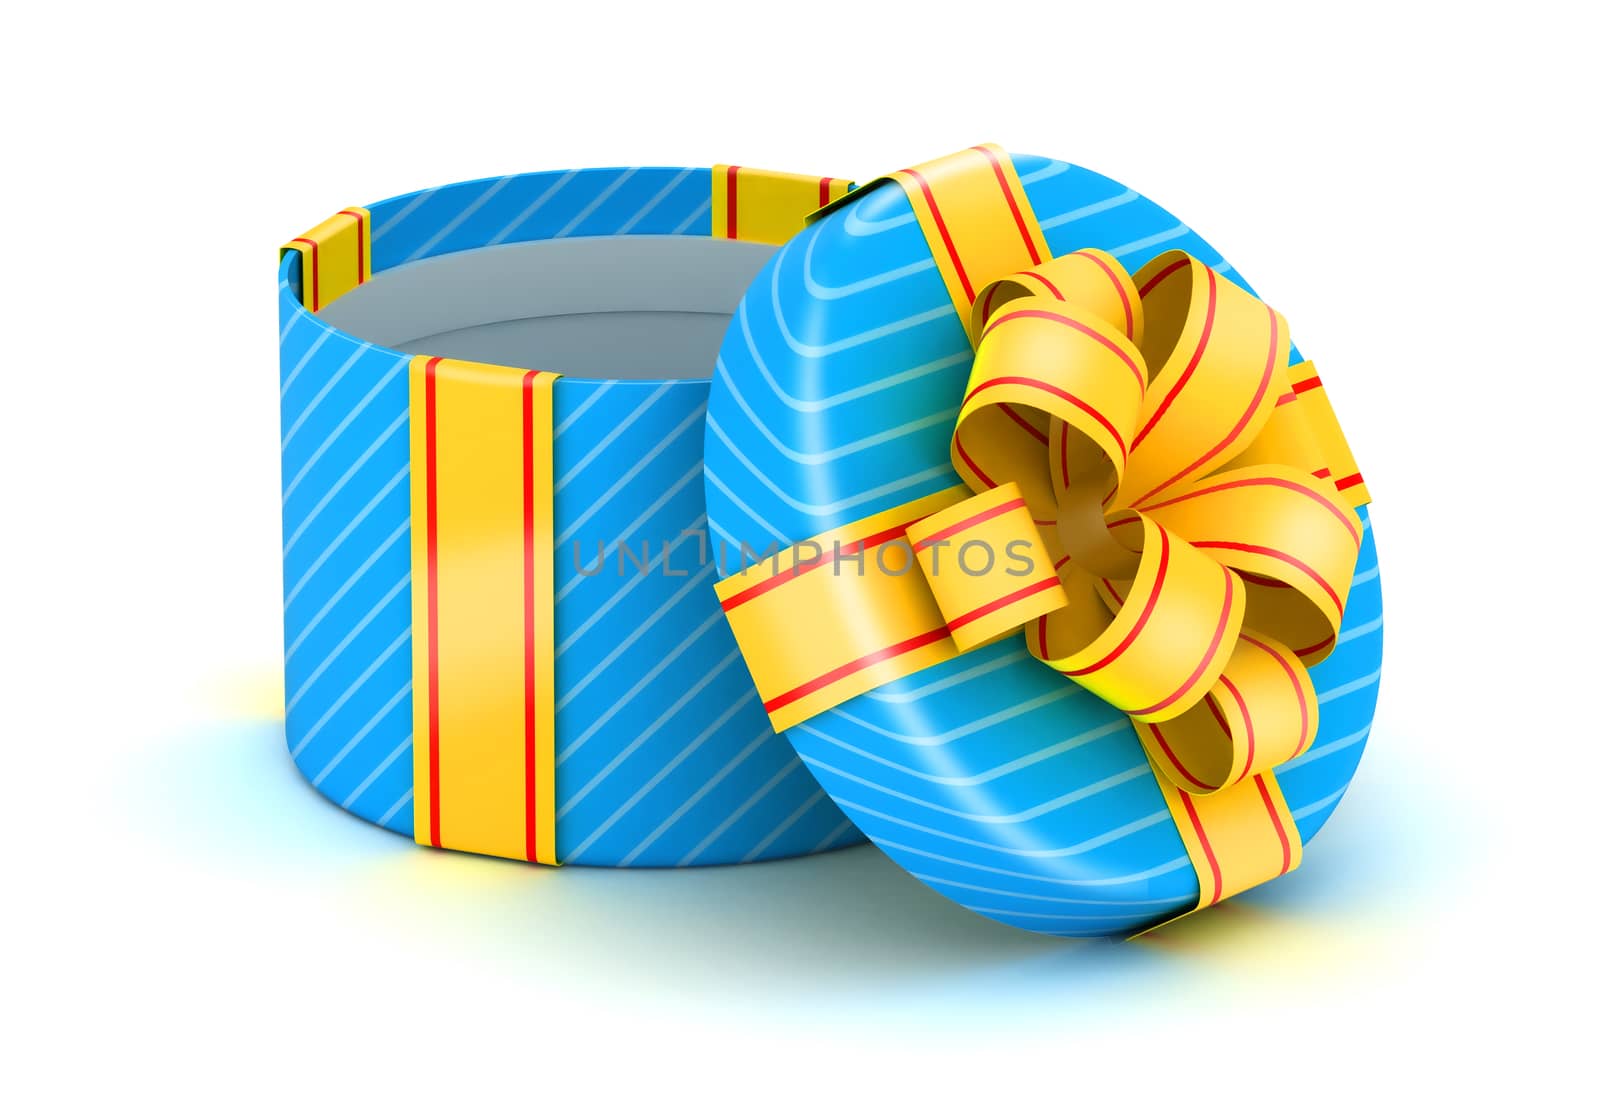 Opened blue gift box with gold ribbons on white background